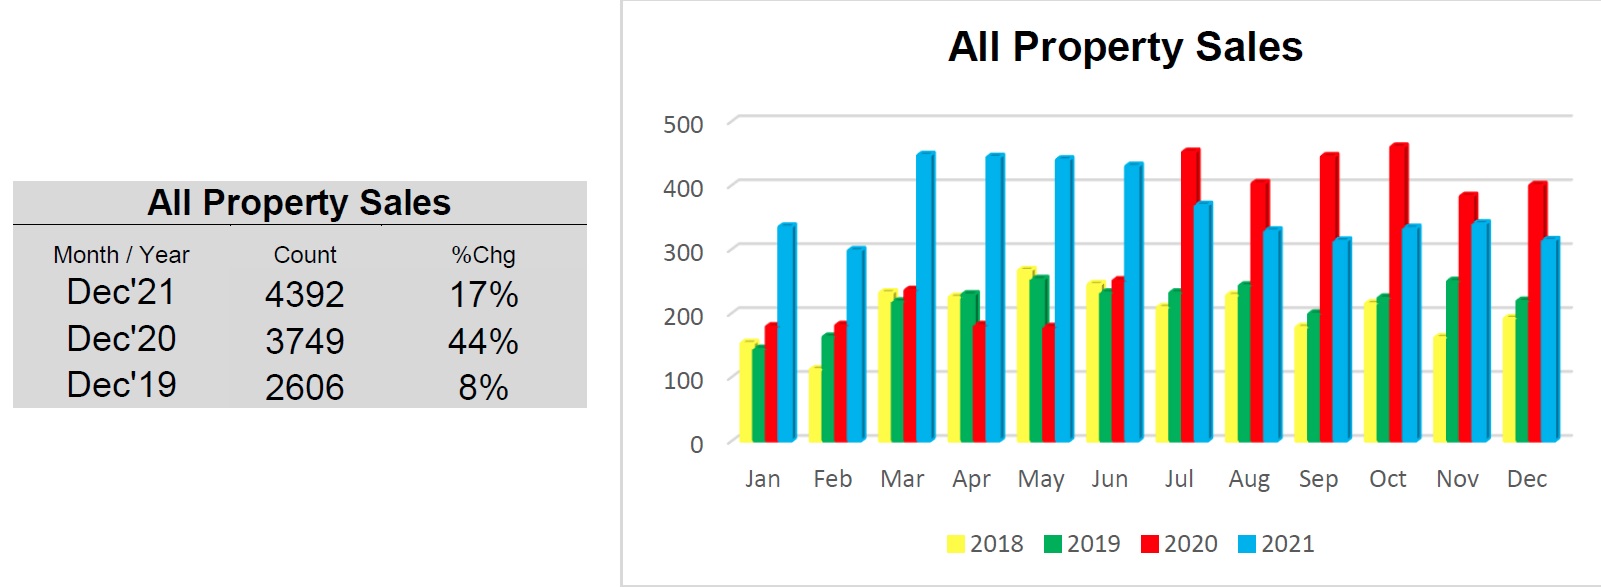 OBX Real Estate 2021 Year-End All Property Sales